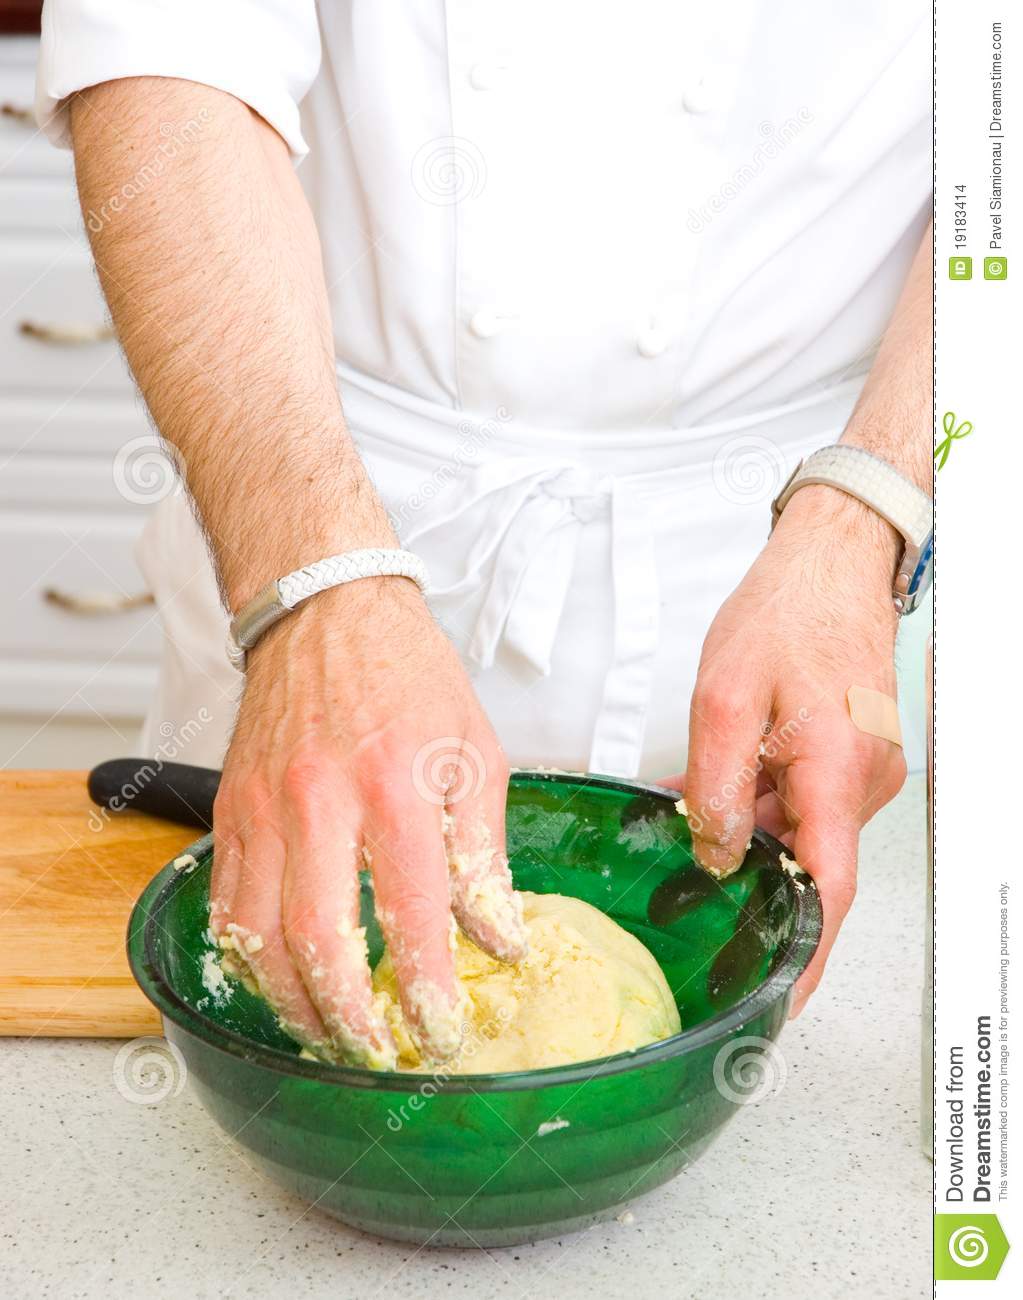 Professional Chef Making Dough Stock Images   Image  19183414